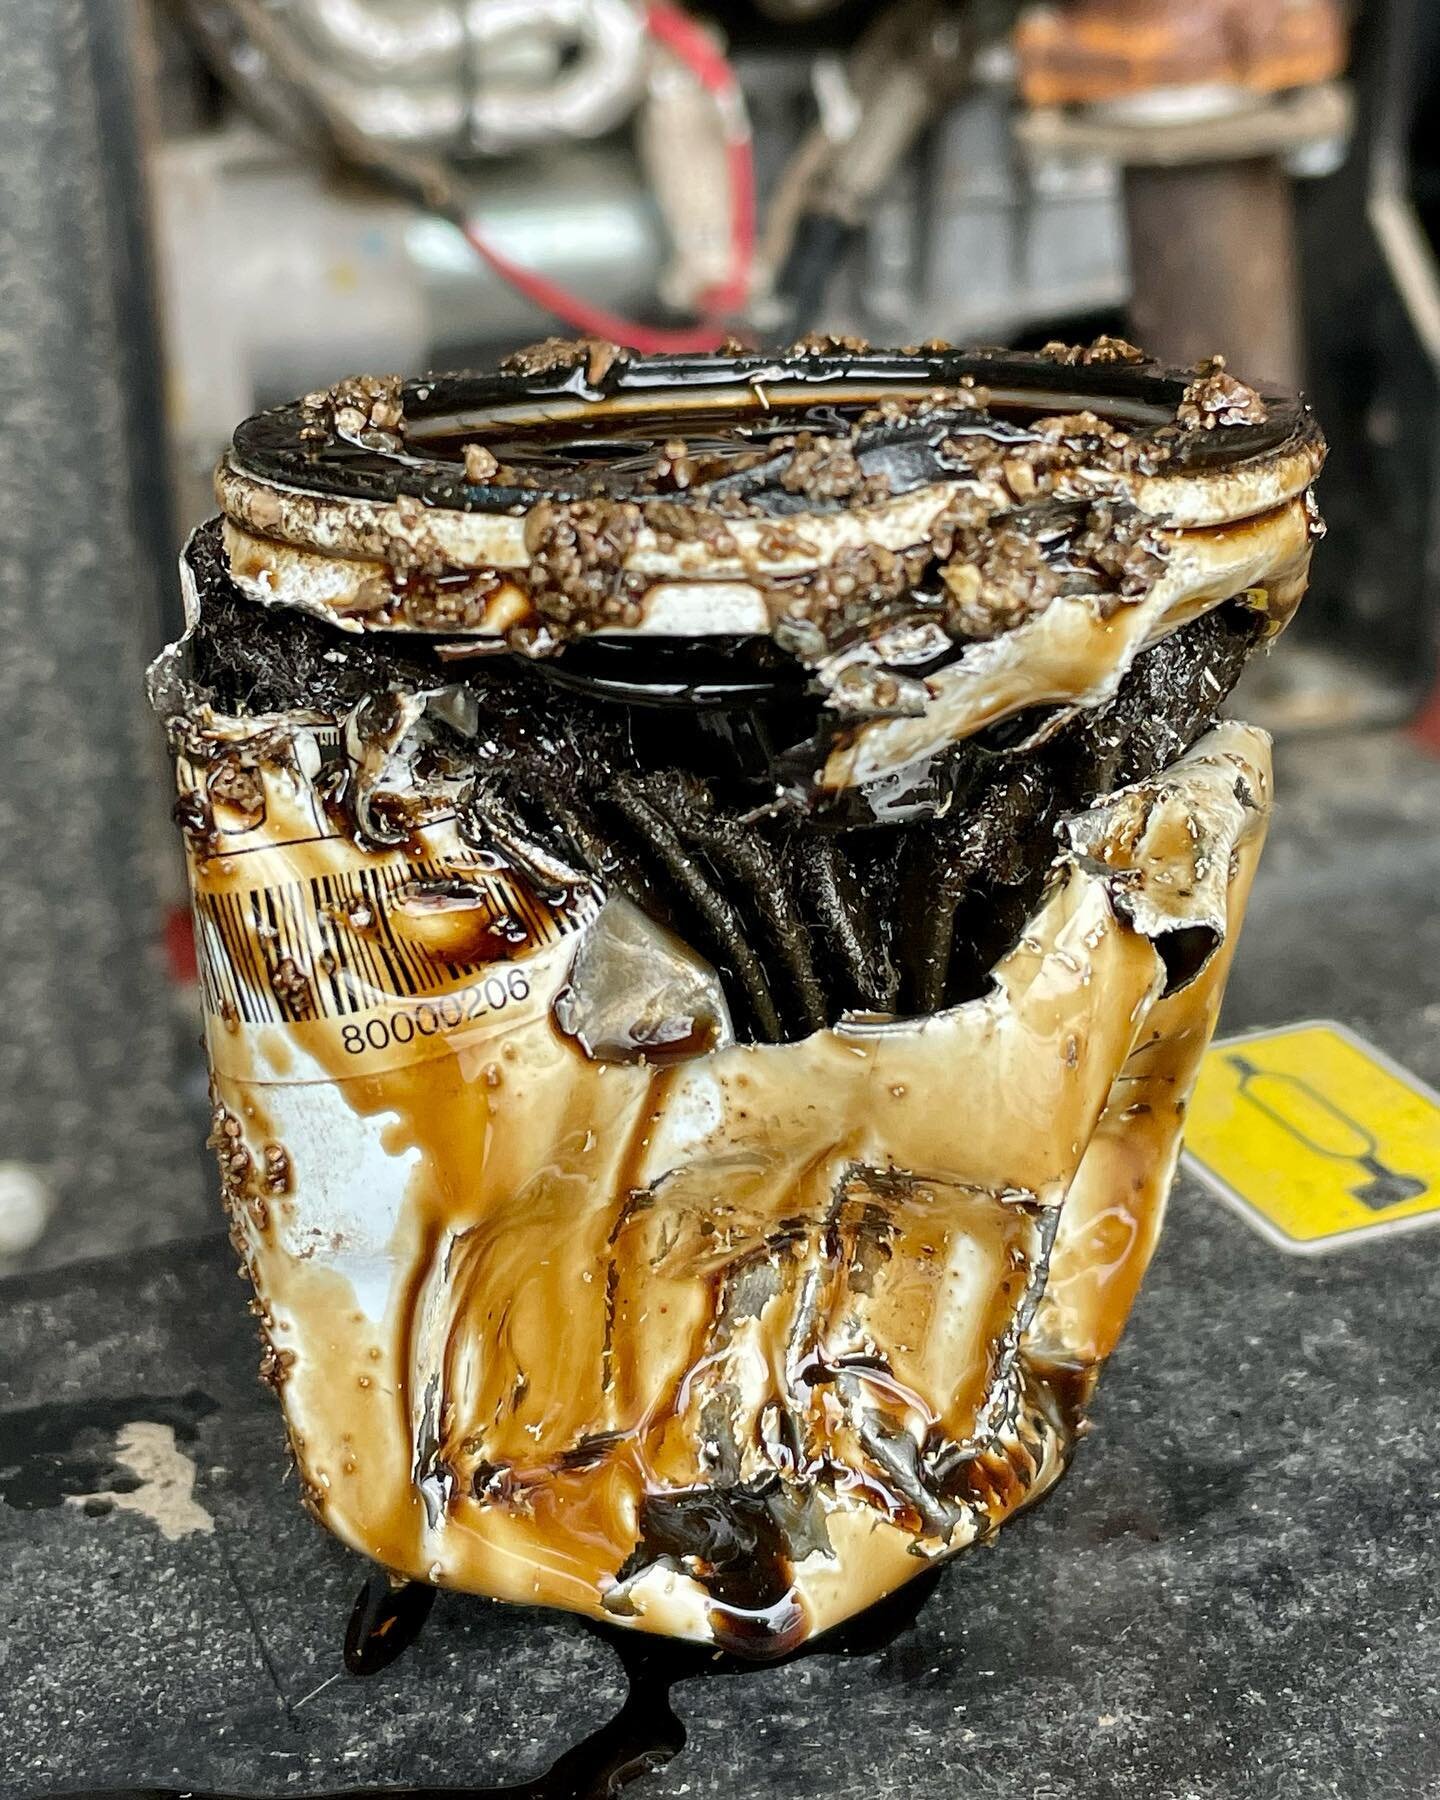 Maintenance tip of the day. If you have a stuck oil filter, don&rsquo;t get frustrated. Just beat the shit out of it until you&rsquo;re blue in face!